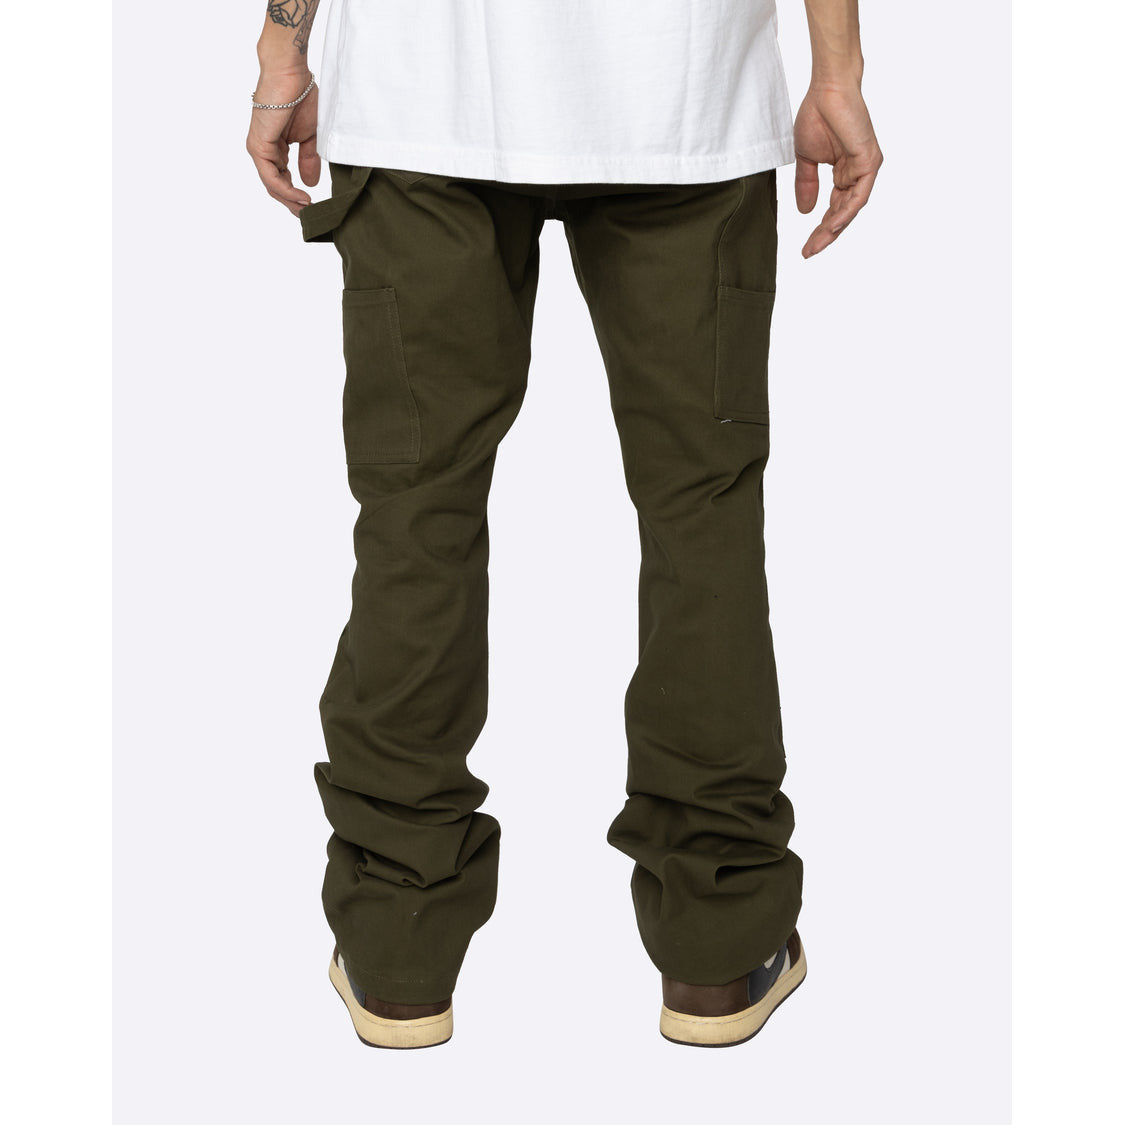 EPTM DOUBLE CARGO PANTS-RED – EPTM.